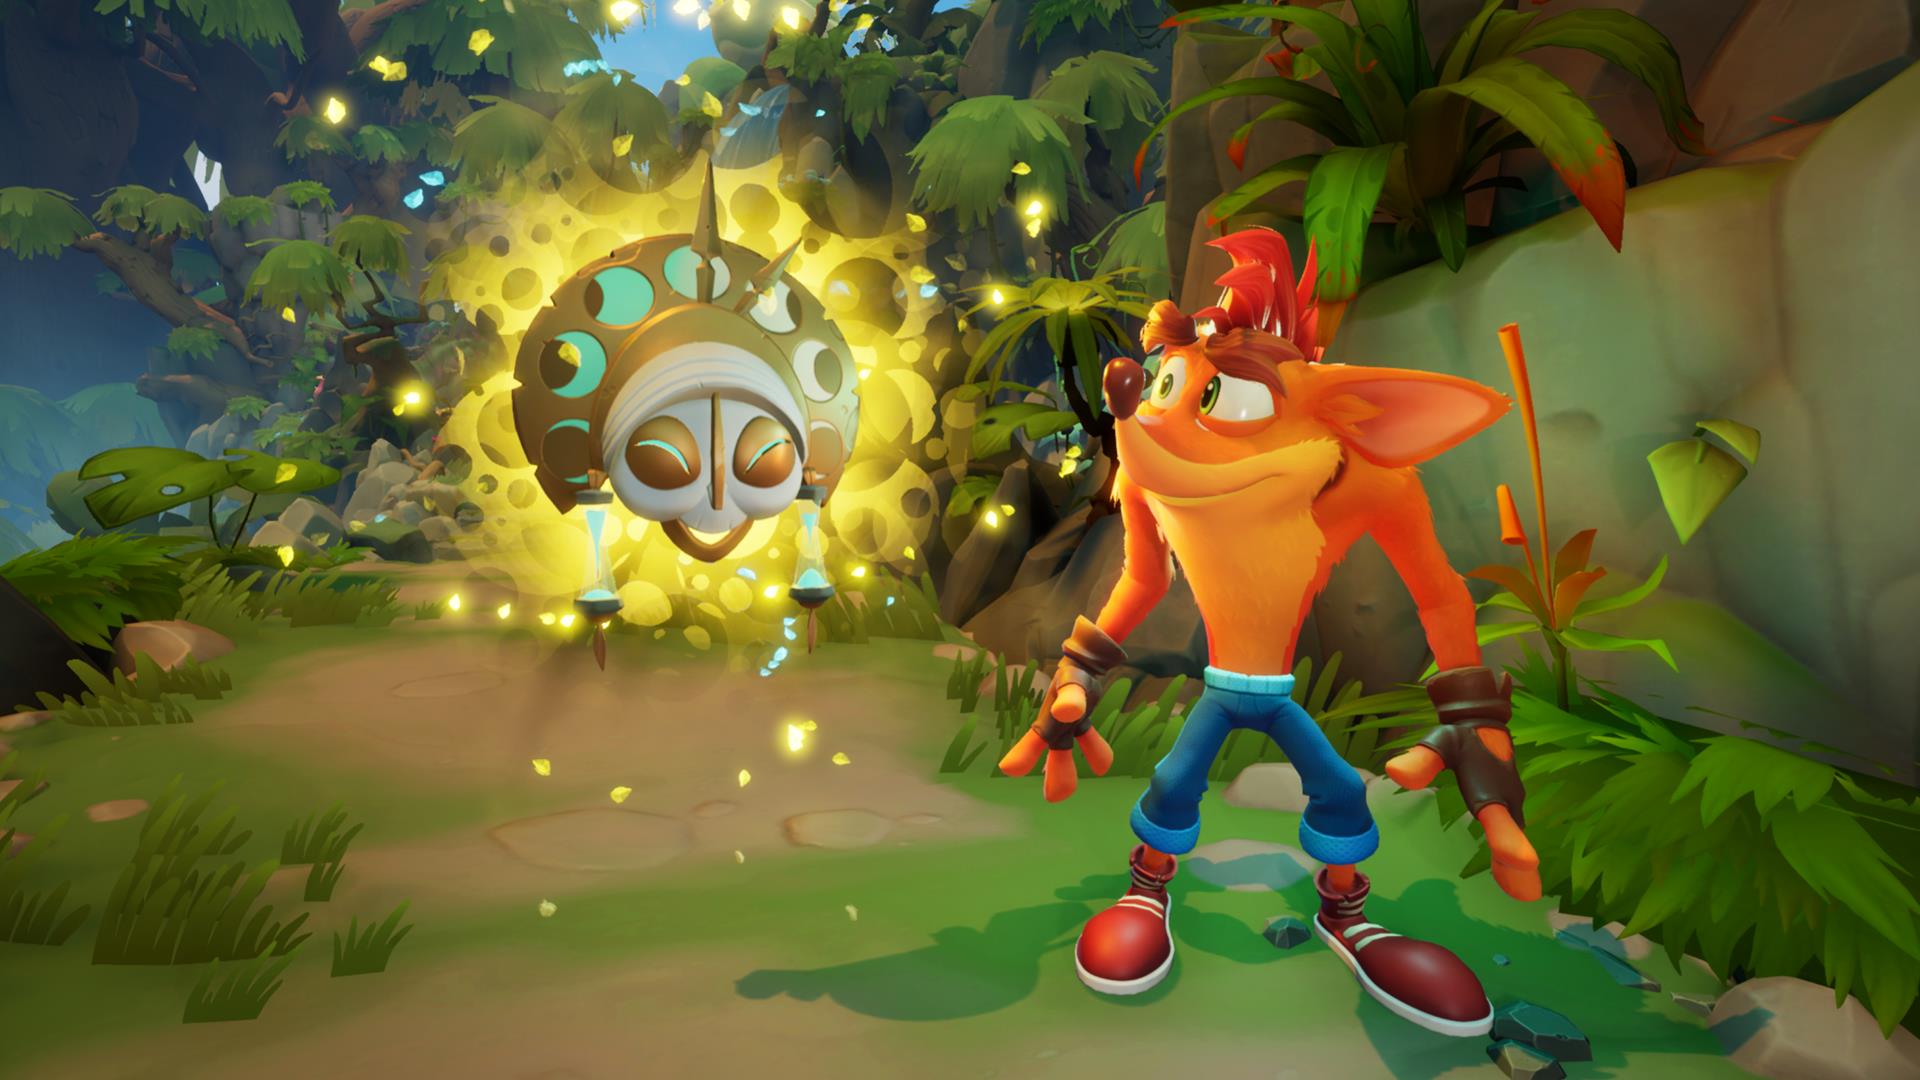 Crash Bandicoot 4 will have in-game purchases, according to the Microsoft Store